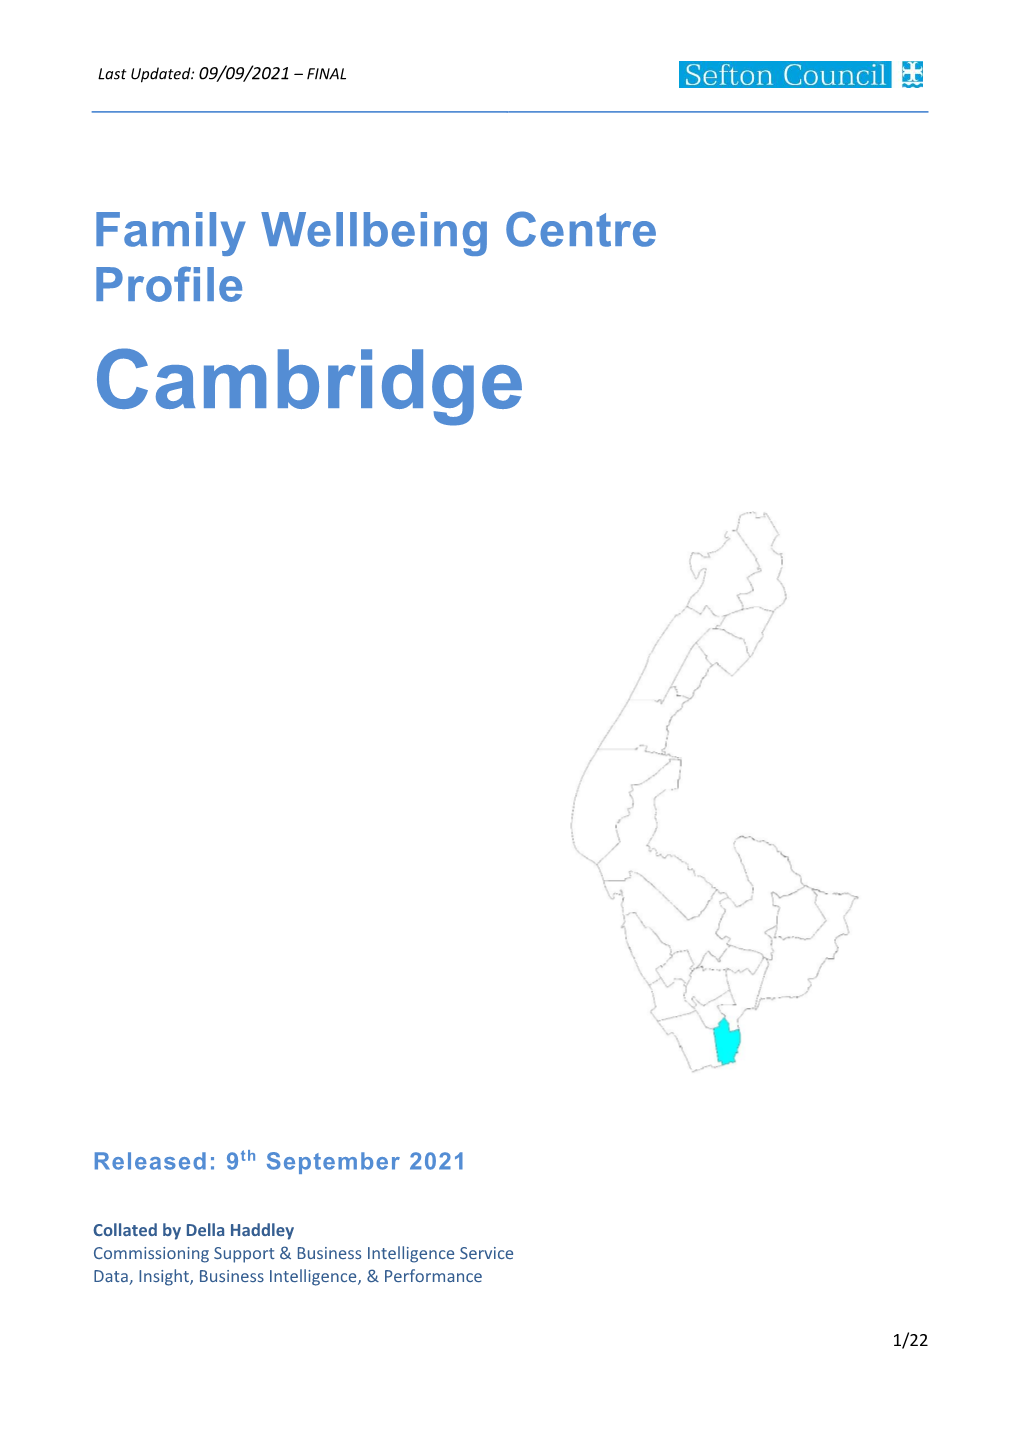 Cambridge Family Wellbeing Centre